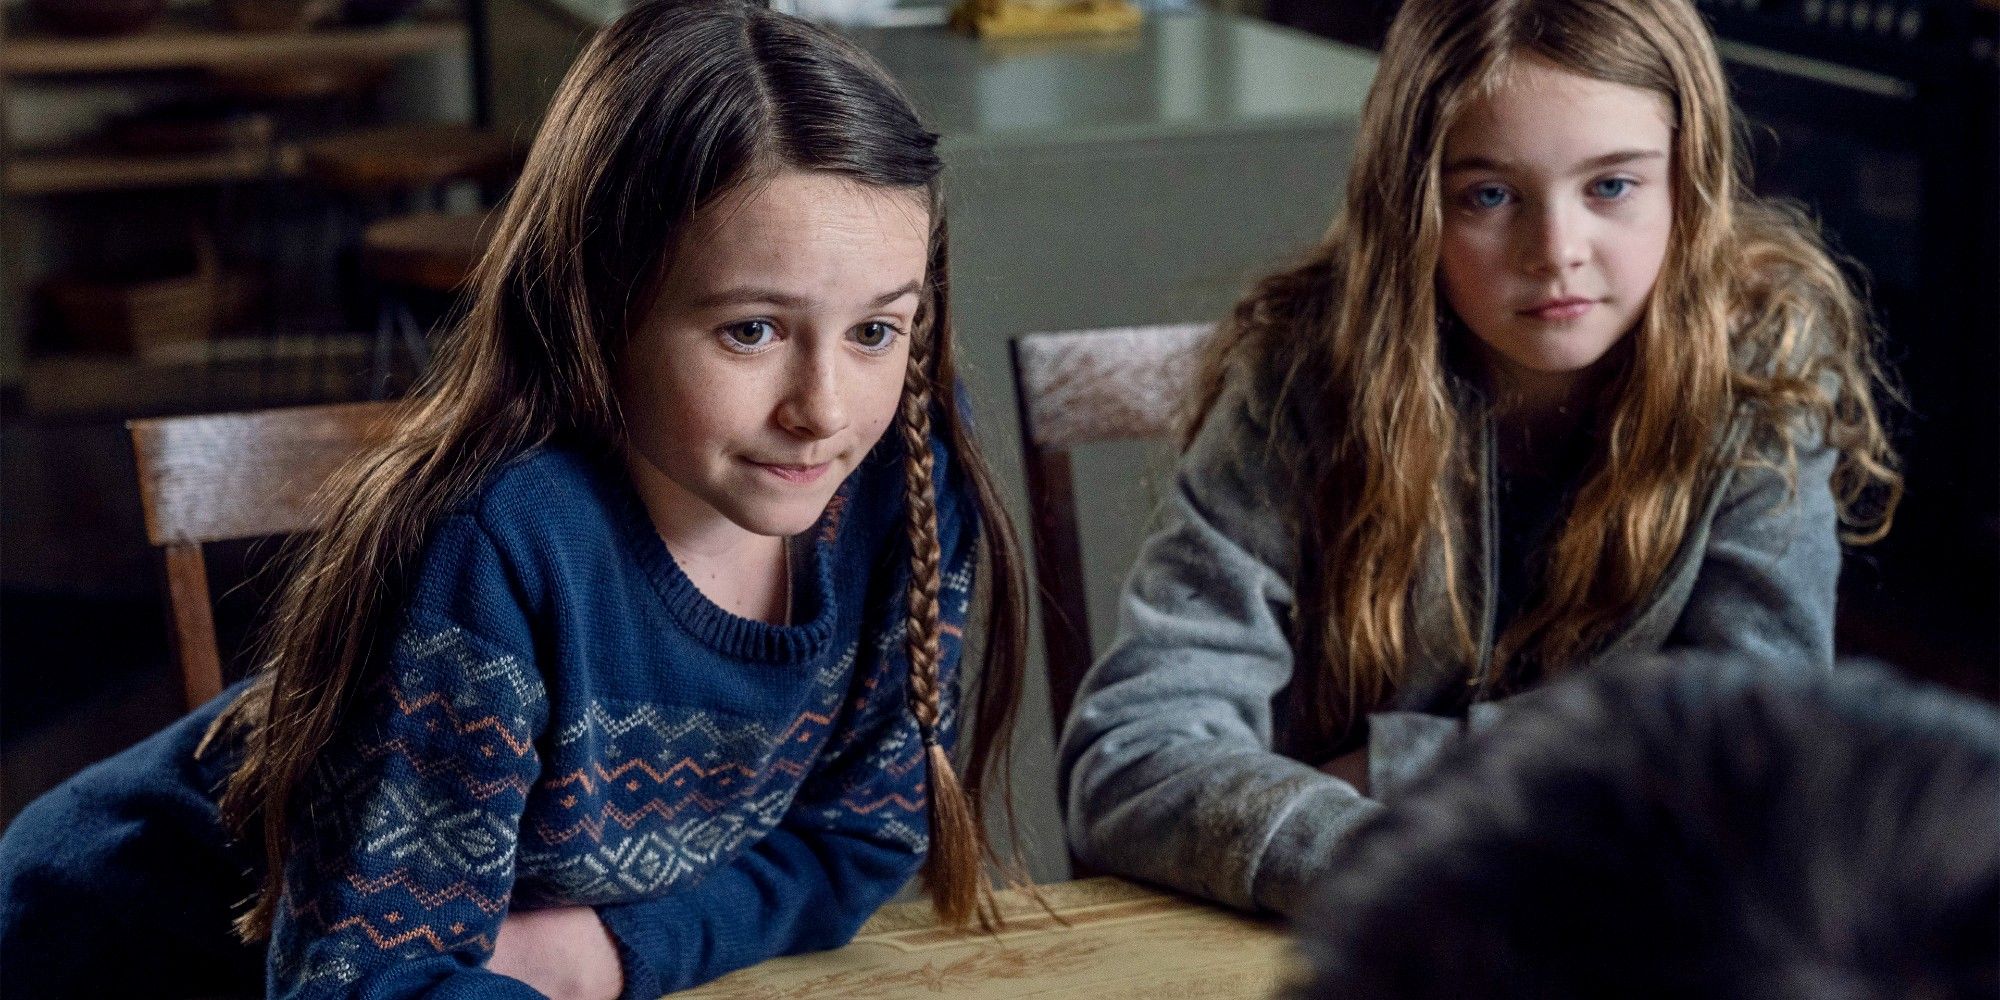 Judith and Gracie in The Walking Dead season 11